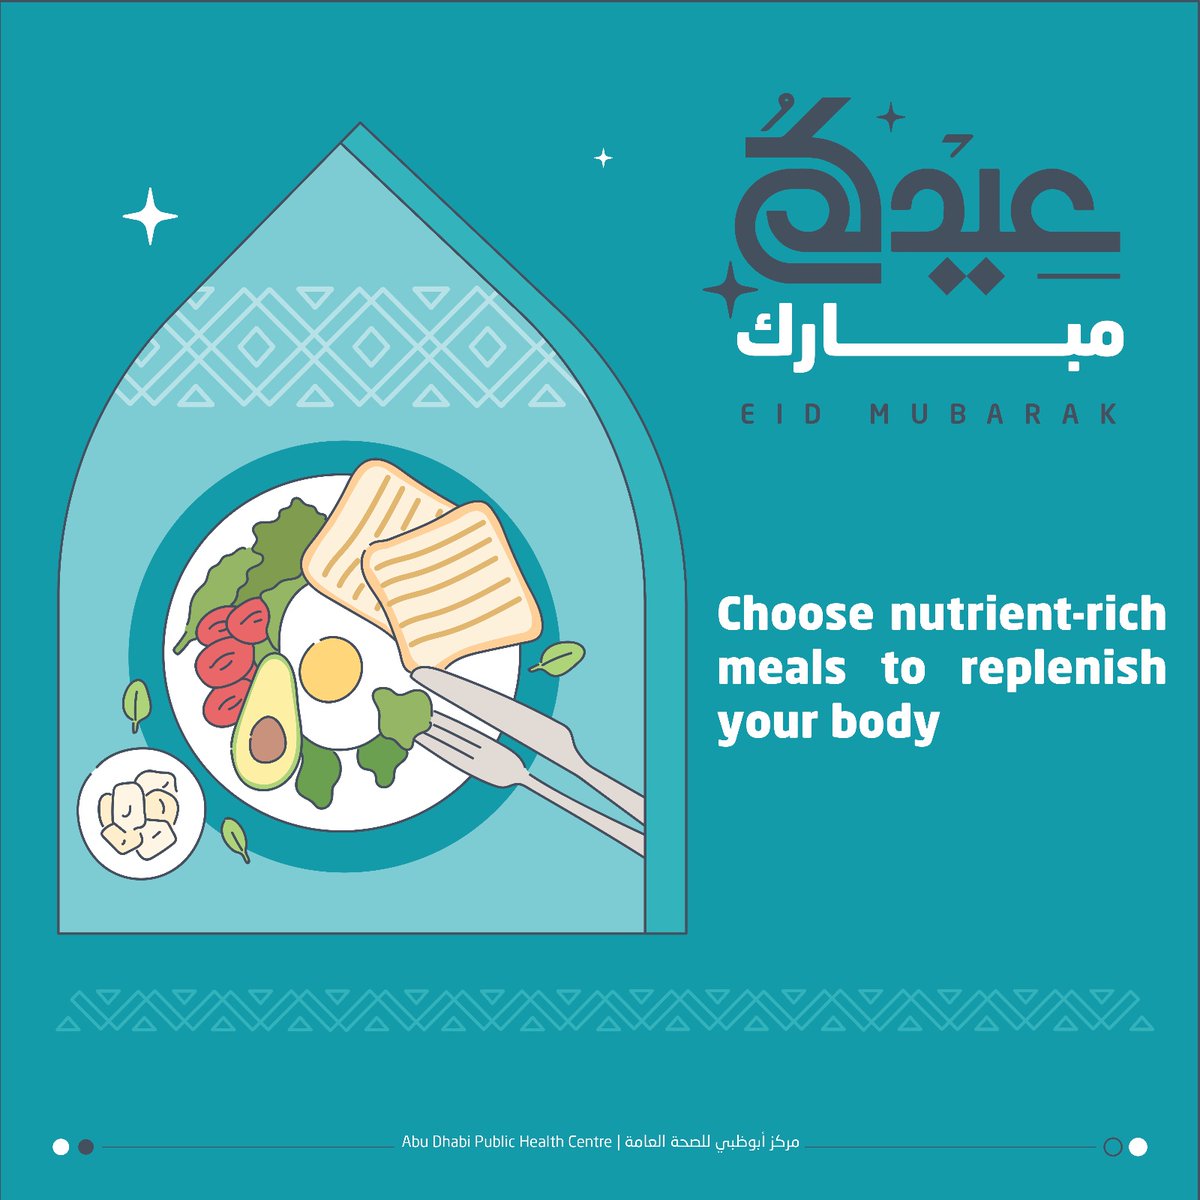 As Ramadan ends, it's time for a smooth transition back to your regular eating habits. Choose nutrient-rich meals to replenish your body. Remember to hydrate well and listen to your body's cues as you return to your usual diet. 🌙🍲 #ADPHC #HealthyHabitsHealthyLife